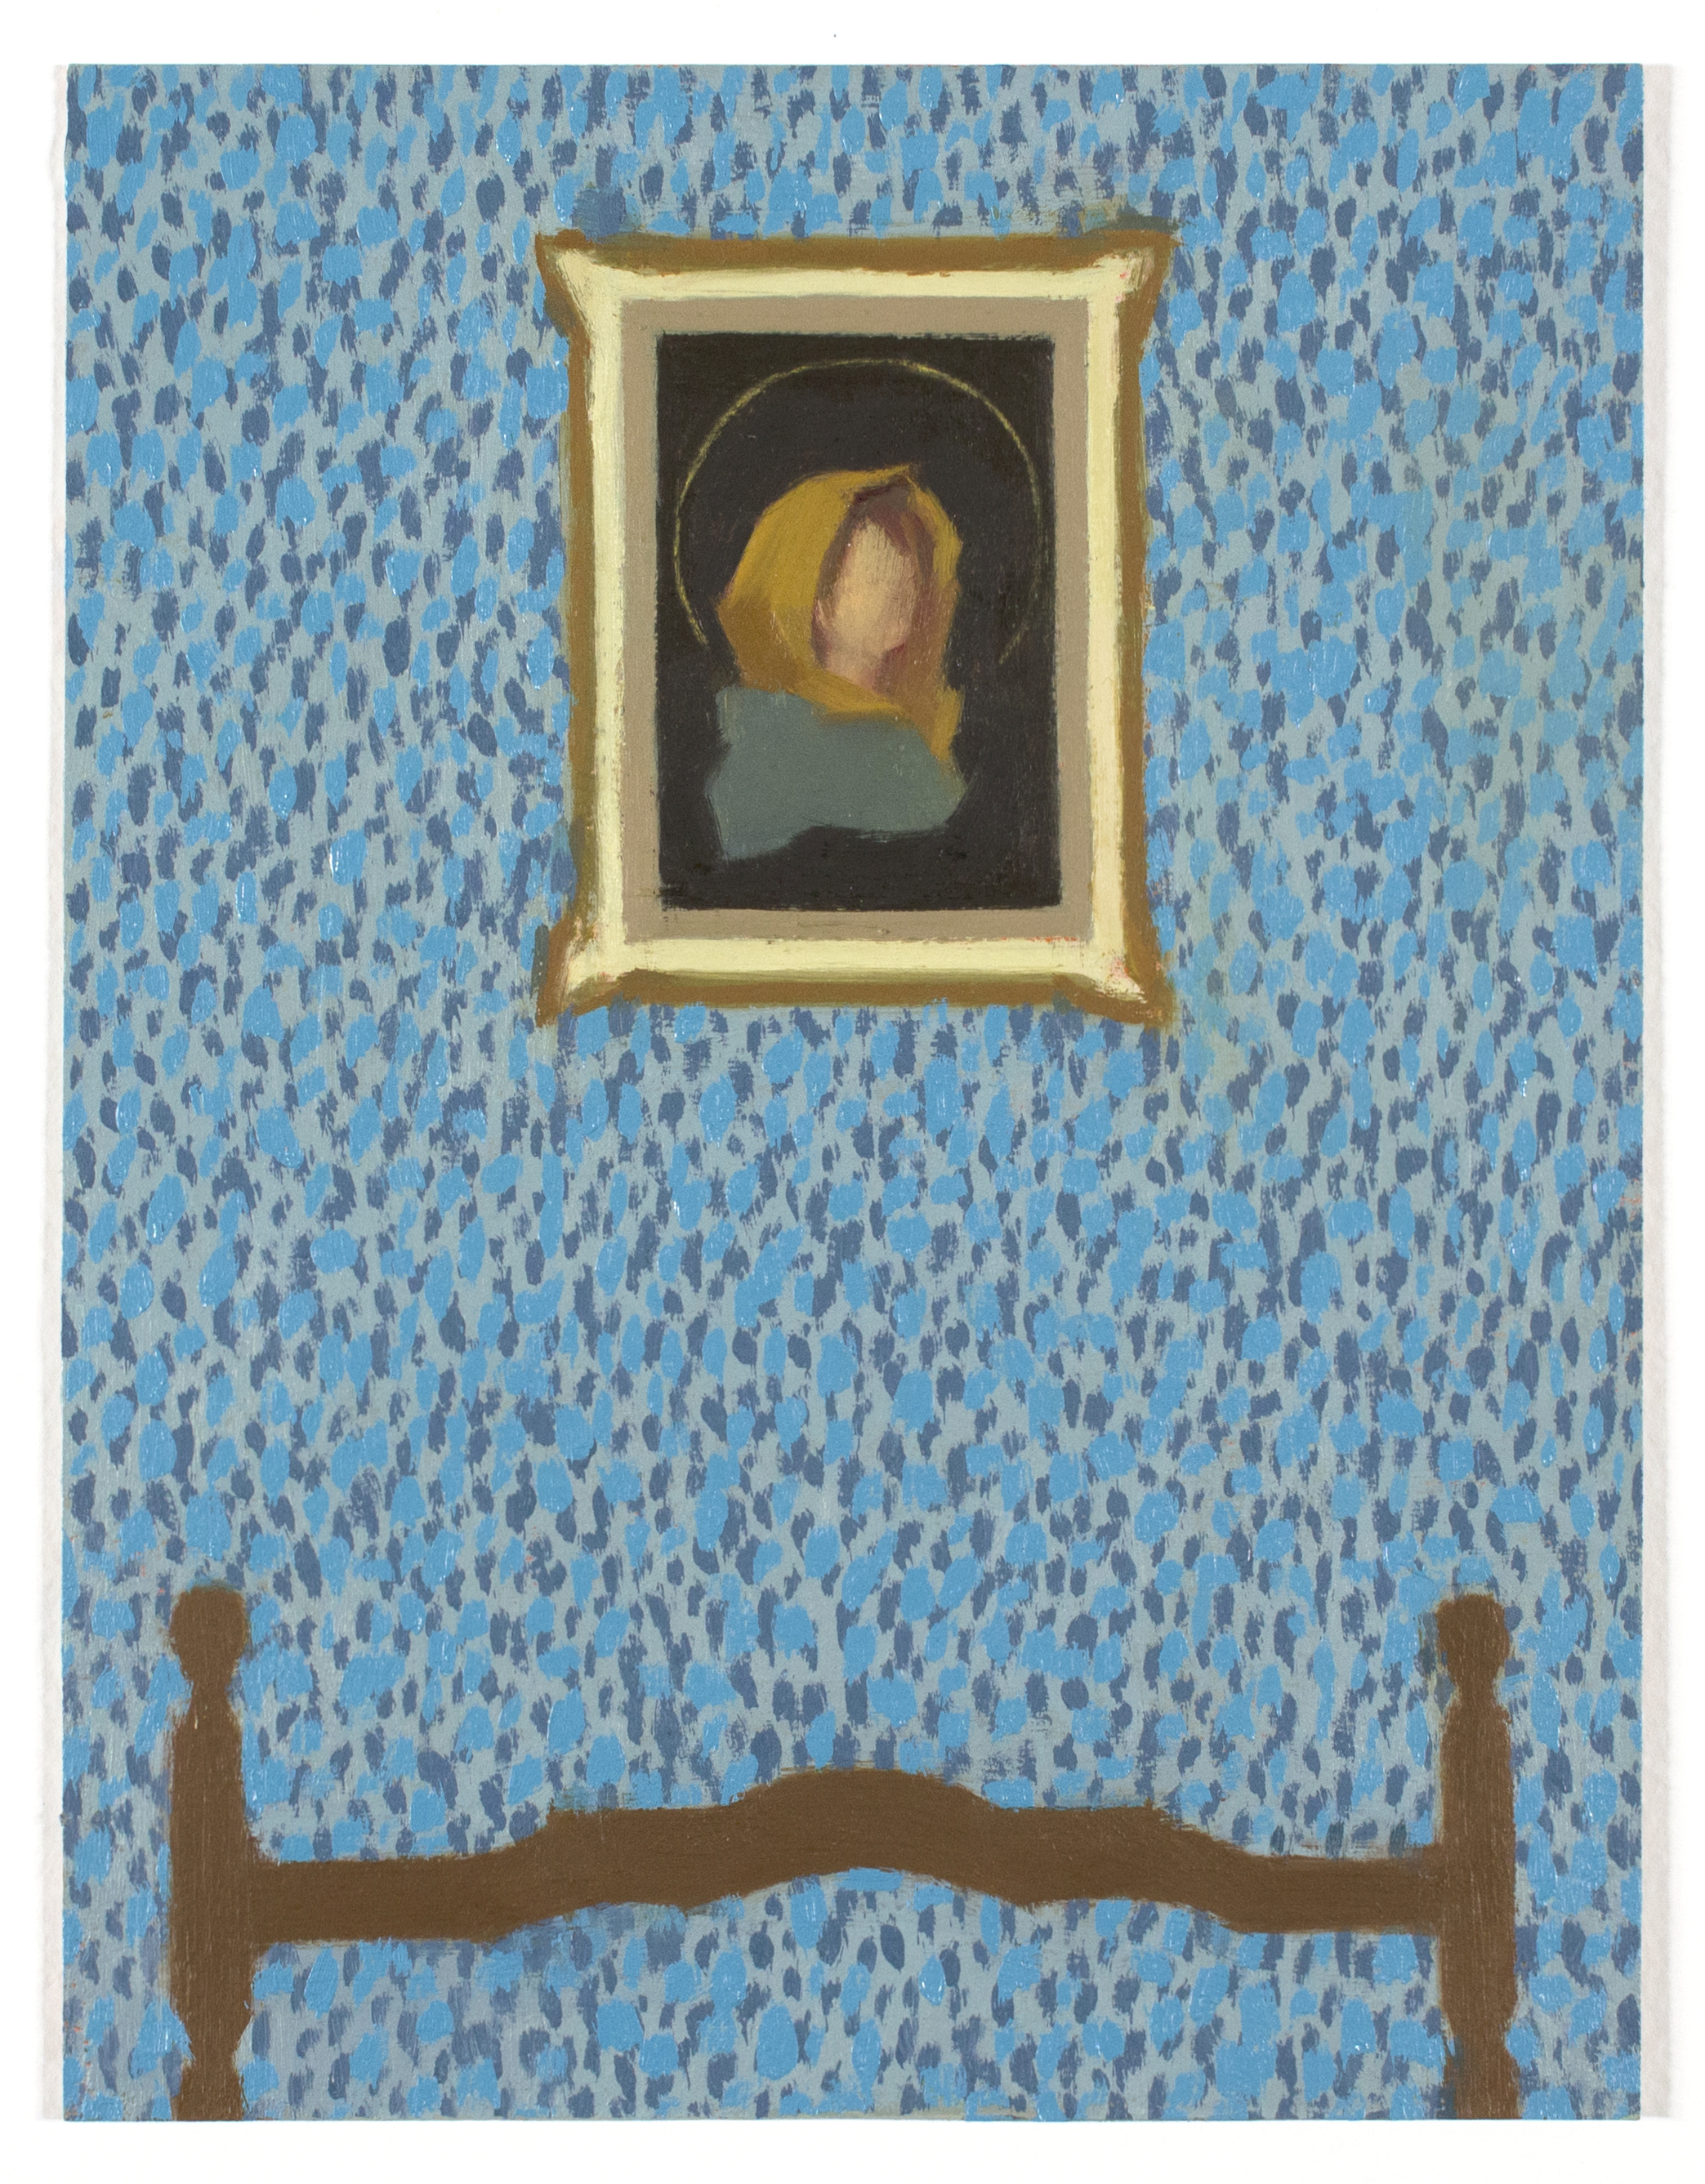 Christina Renfer Vogel, Blue Room, Oil and Acrylic on Paper, 7 13/16 x 6 inches, 2017